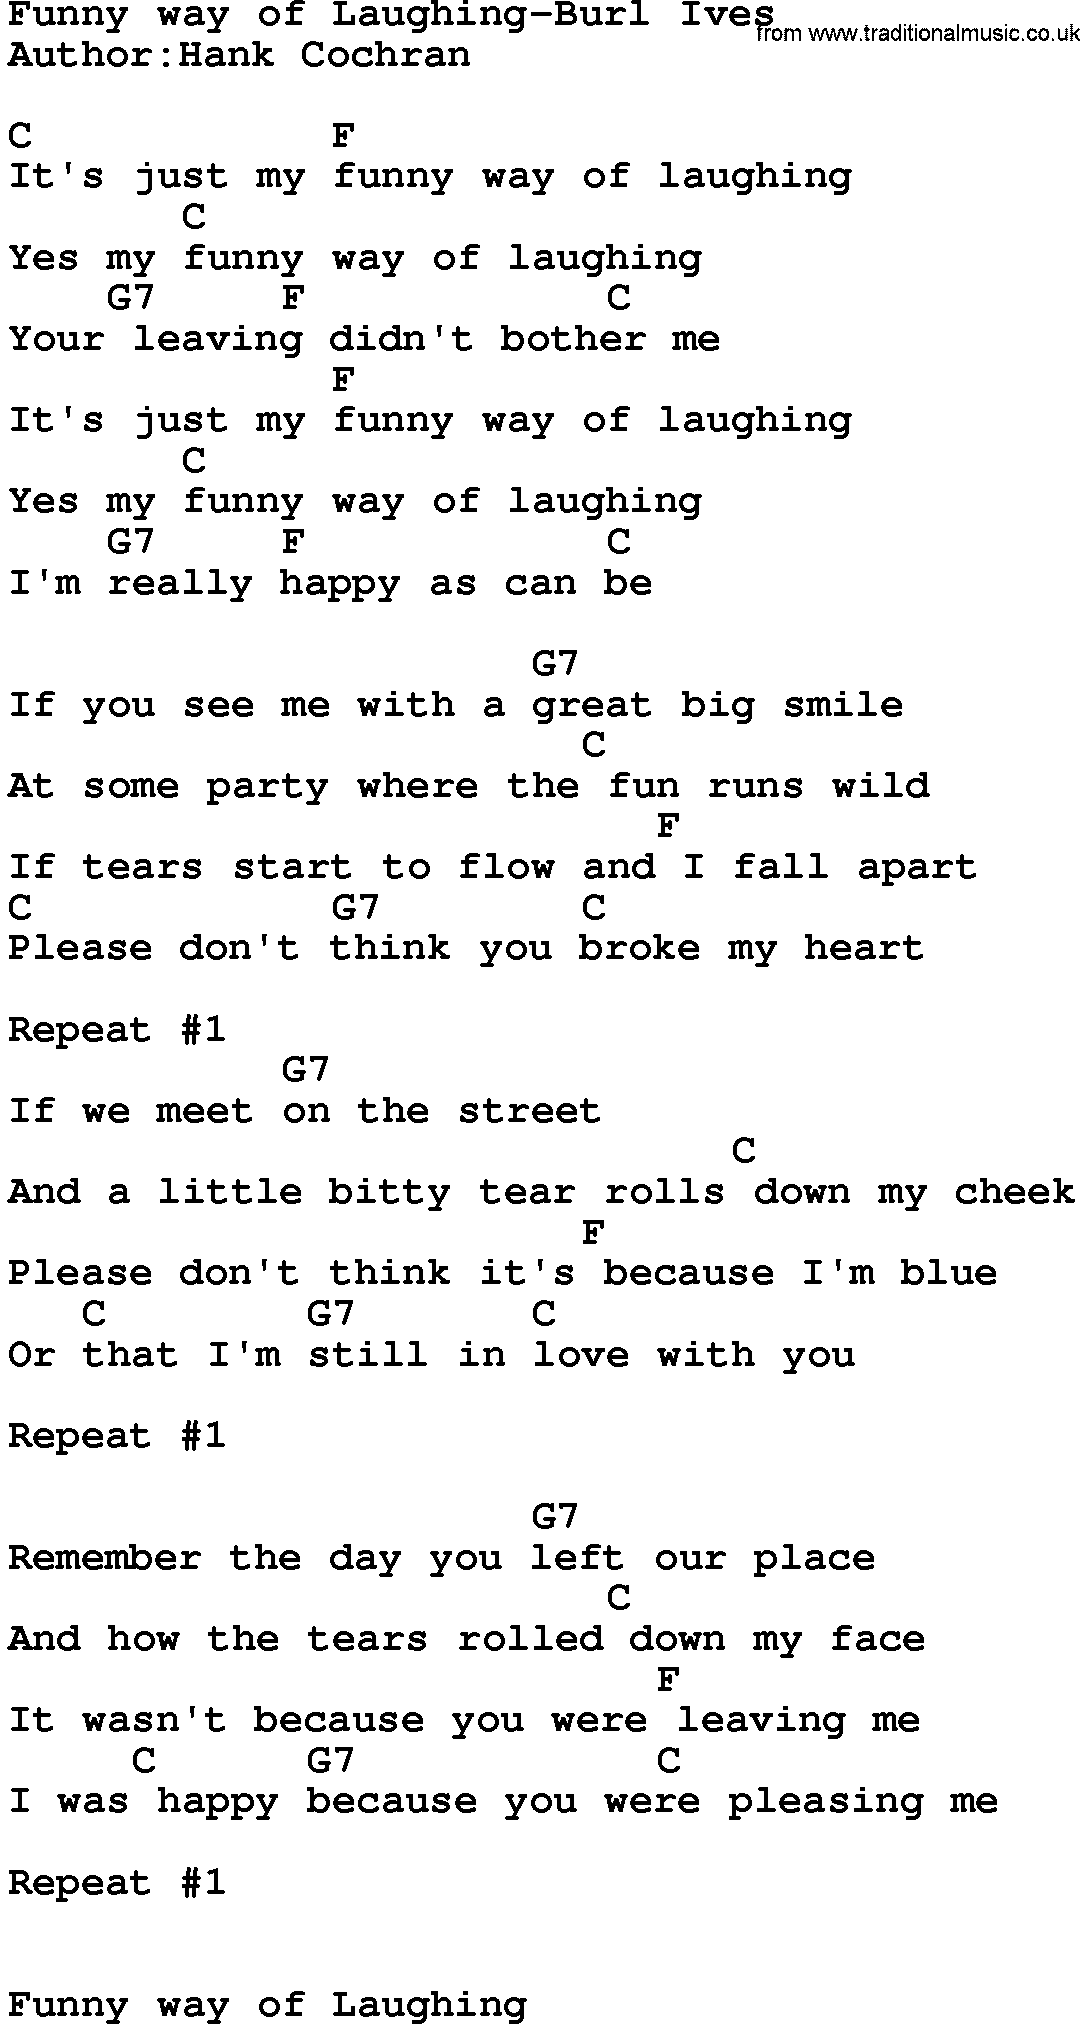 Country music song: Funny Way Of Laughing-Burl Ives lyrics and chords